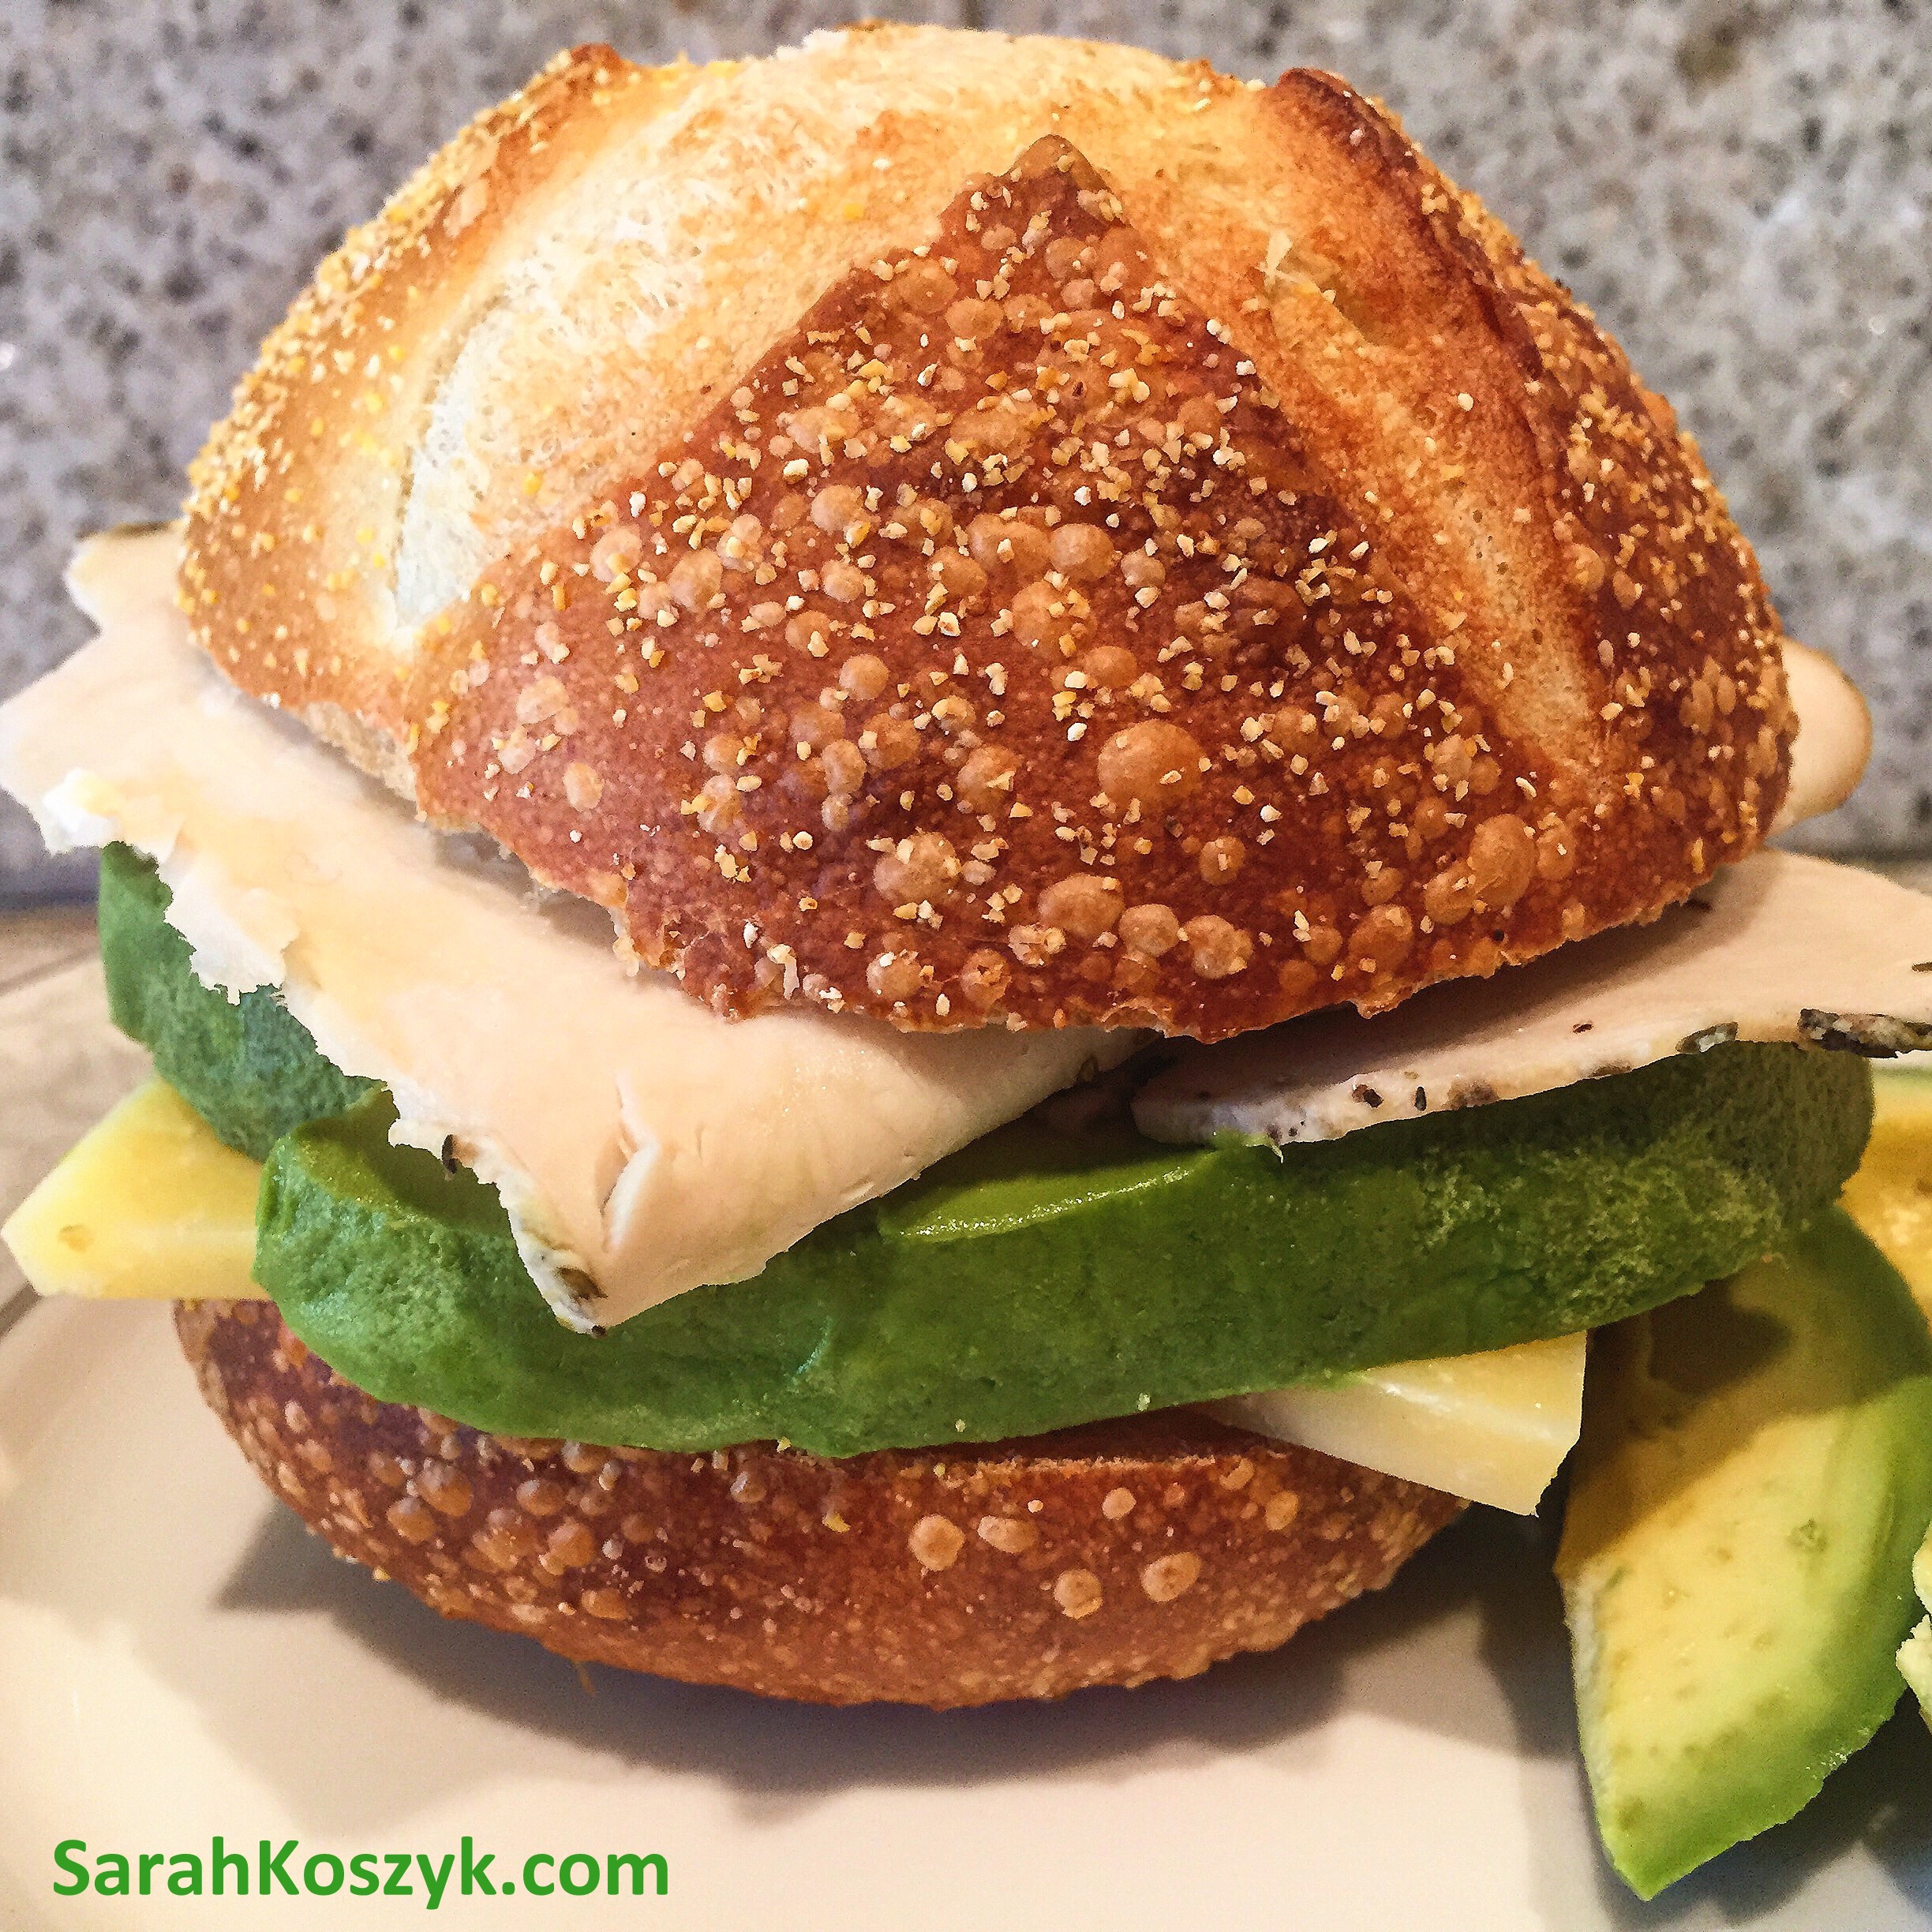 5 Tips To Eat A Healthier Sandwich